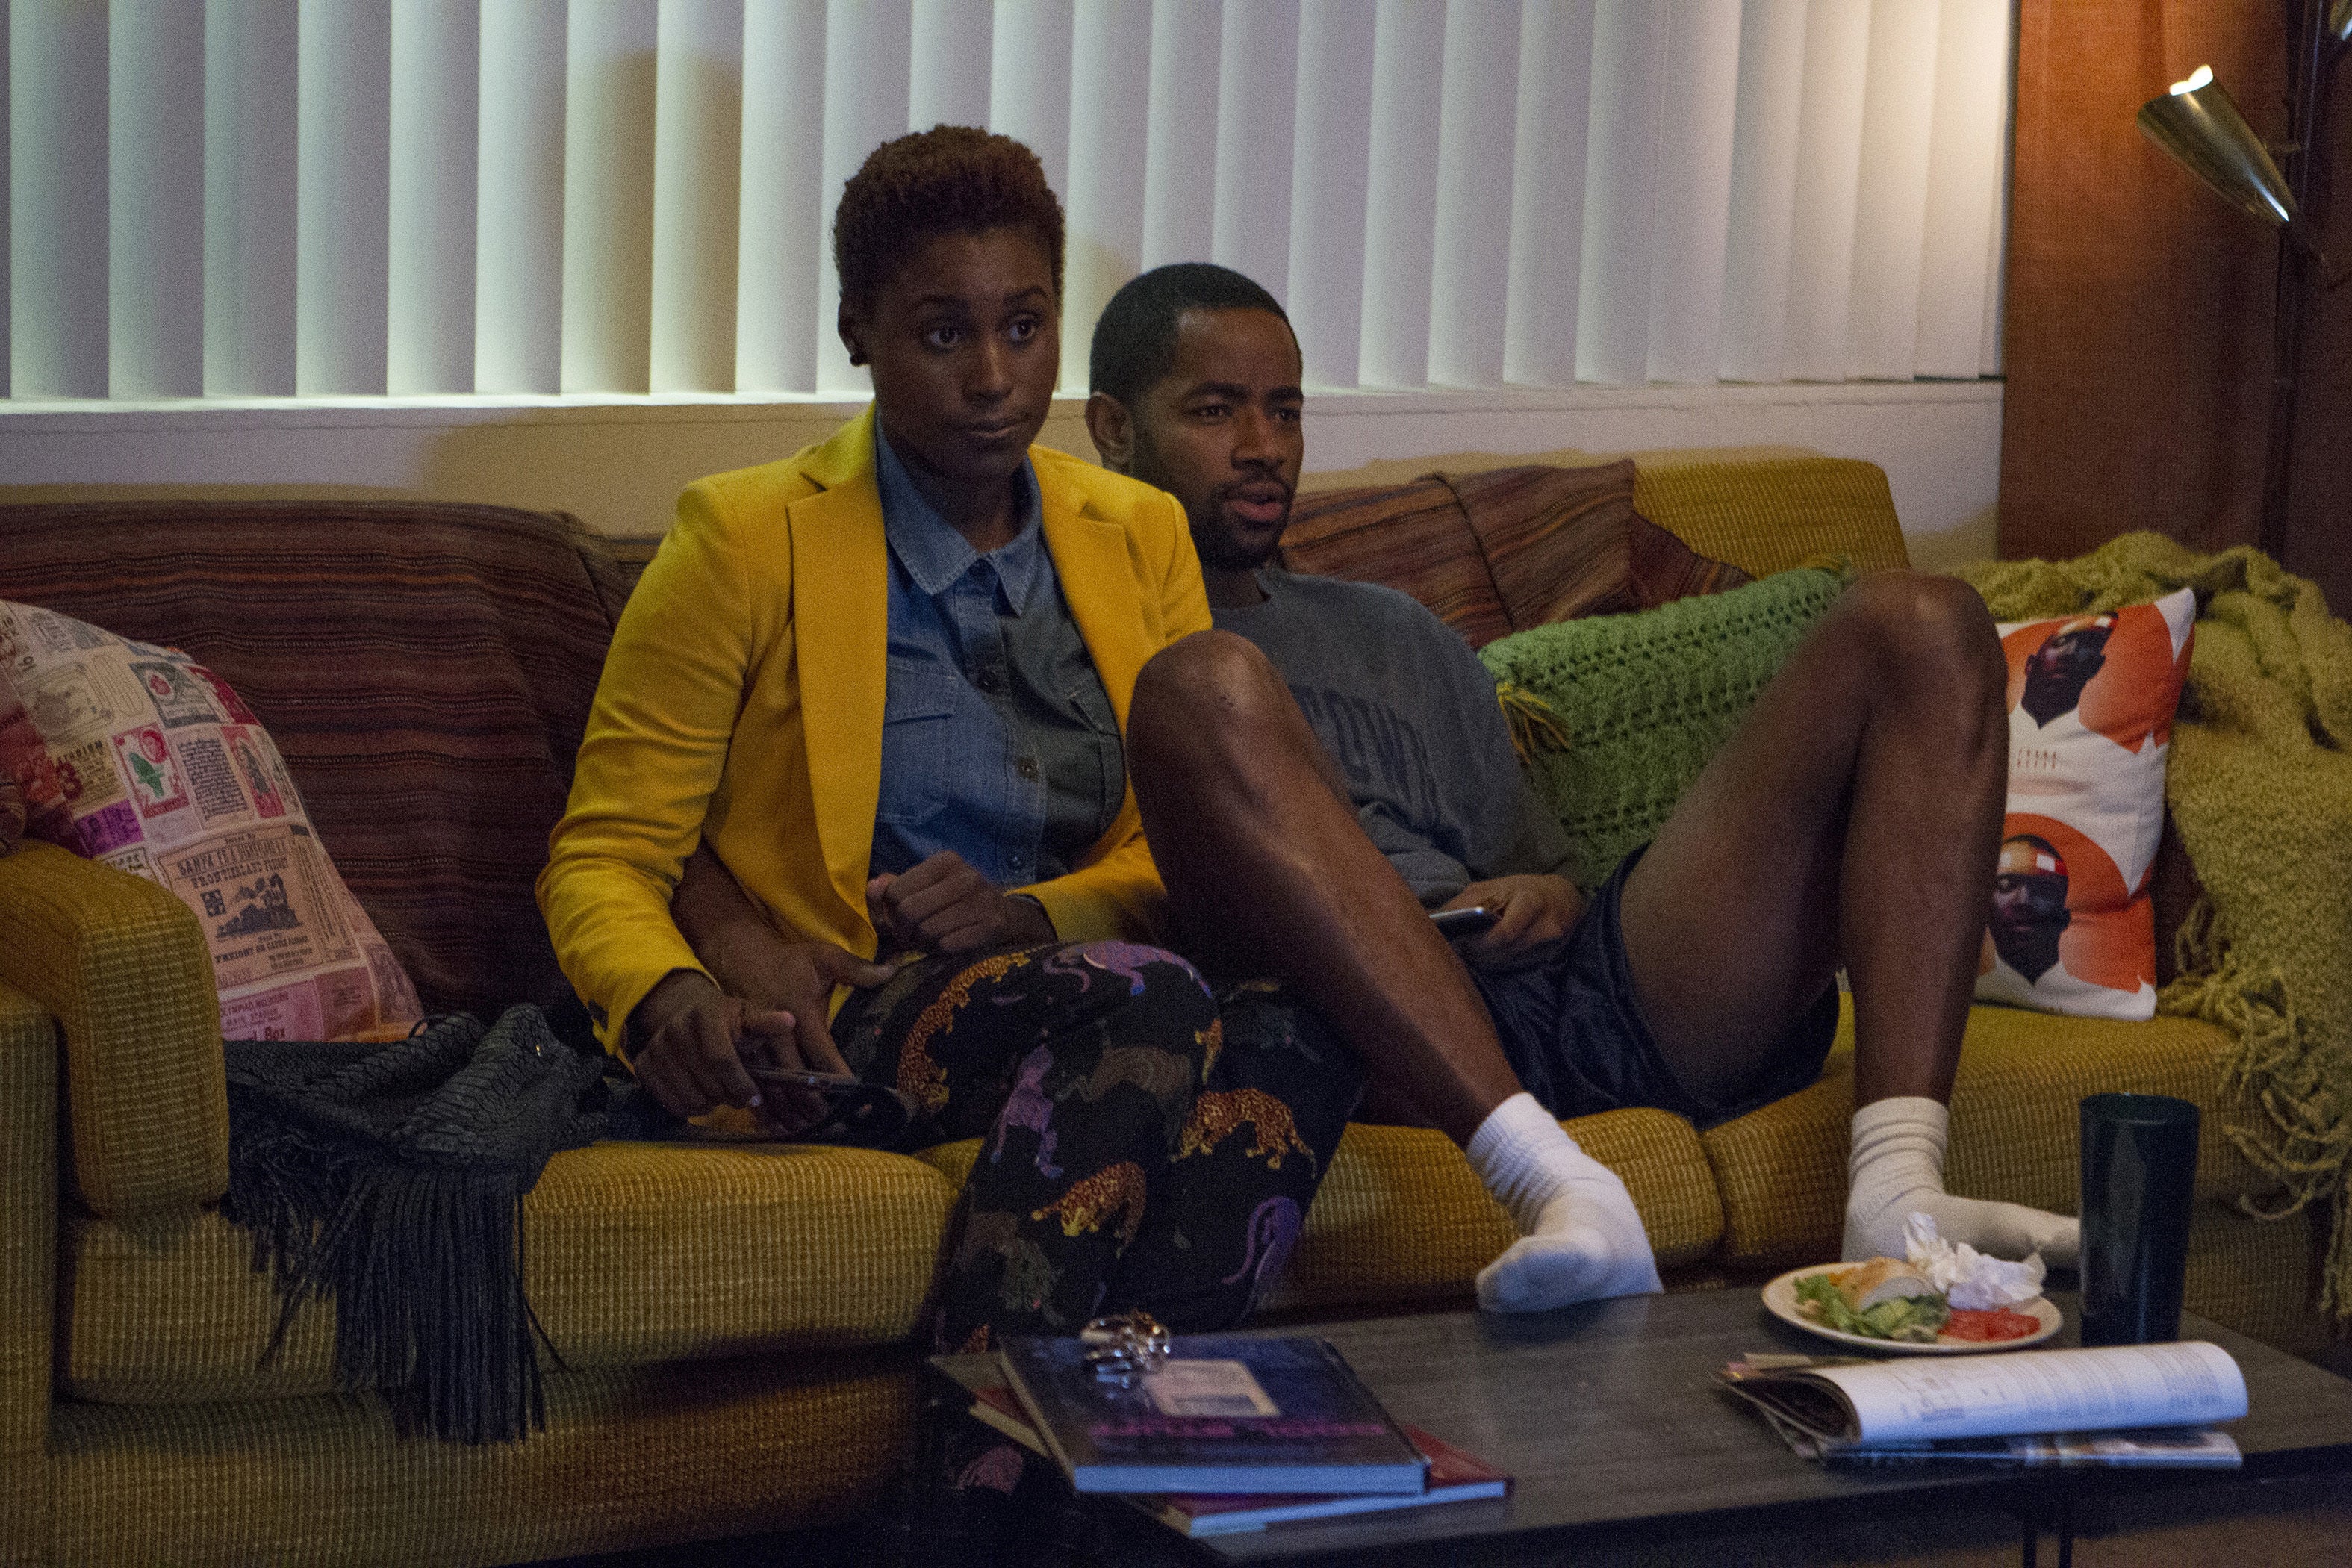 'Insecure' #TeamIssa vs. #TeamLawrence Viewers Have Divided Everyone's Twitter Timelines, Where Do You Stand?